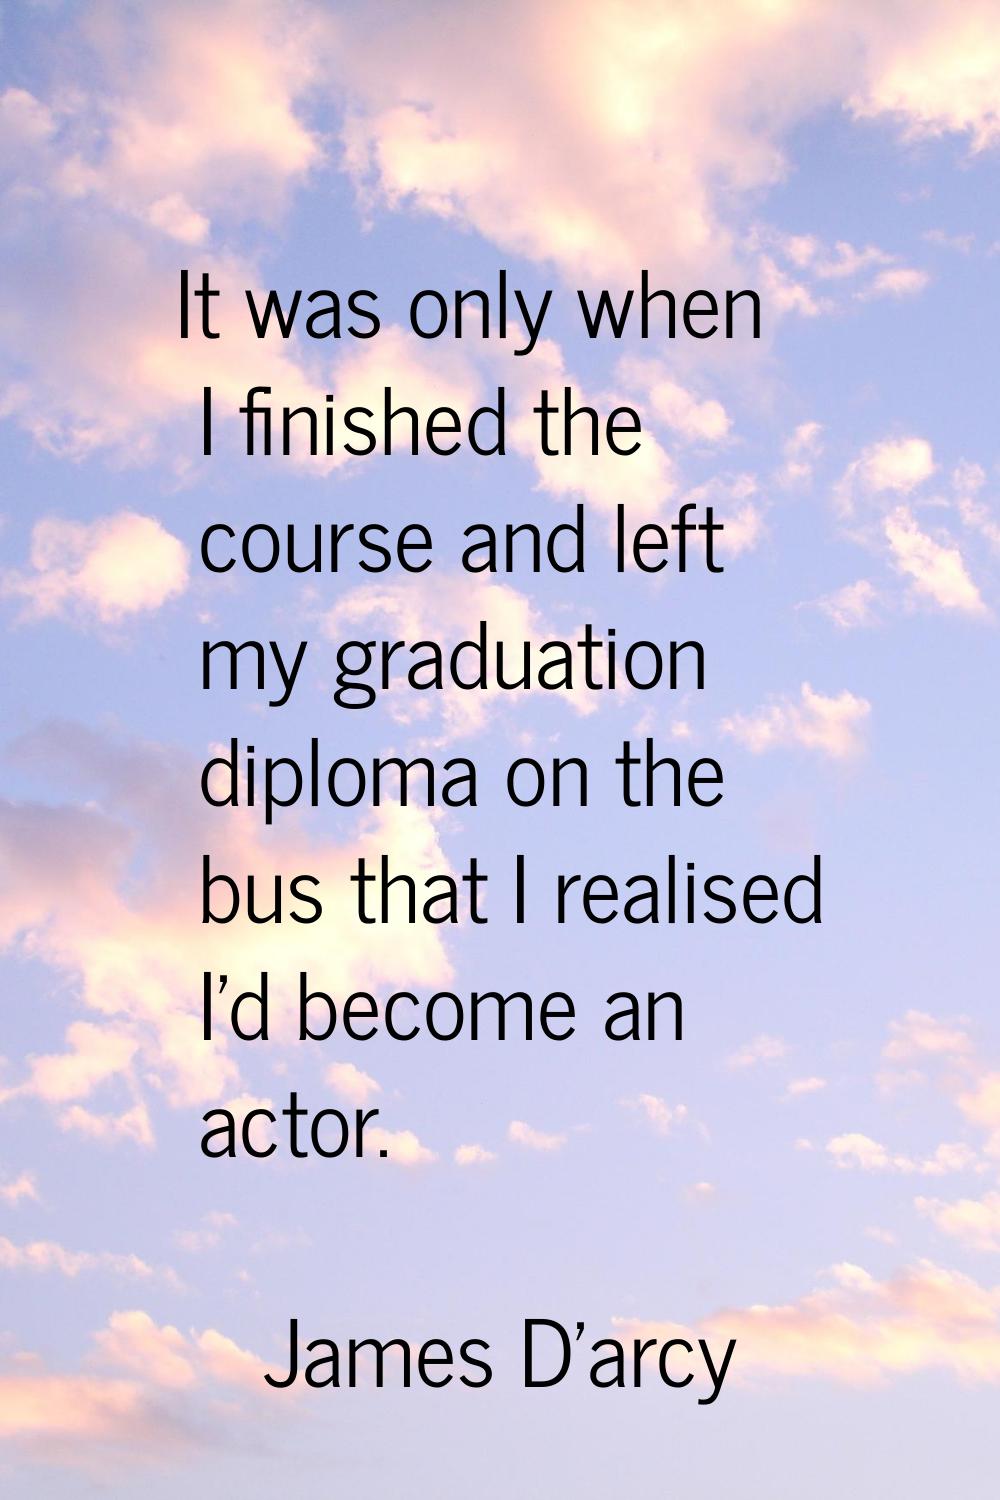 It was only when I finished the course and left my graduation diploma on the bus that I realised I'